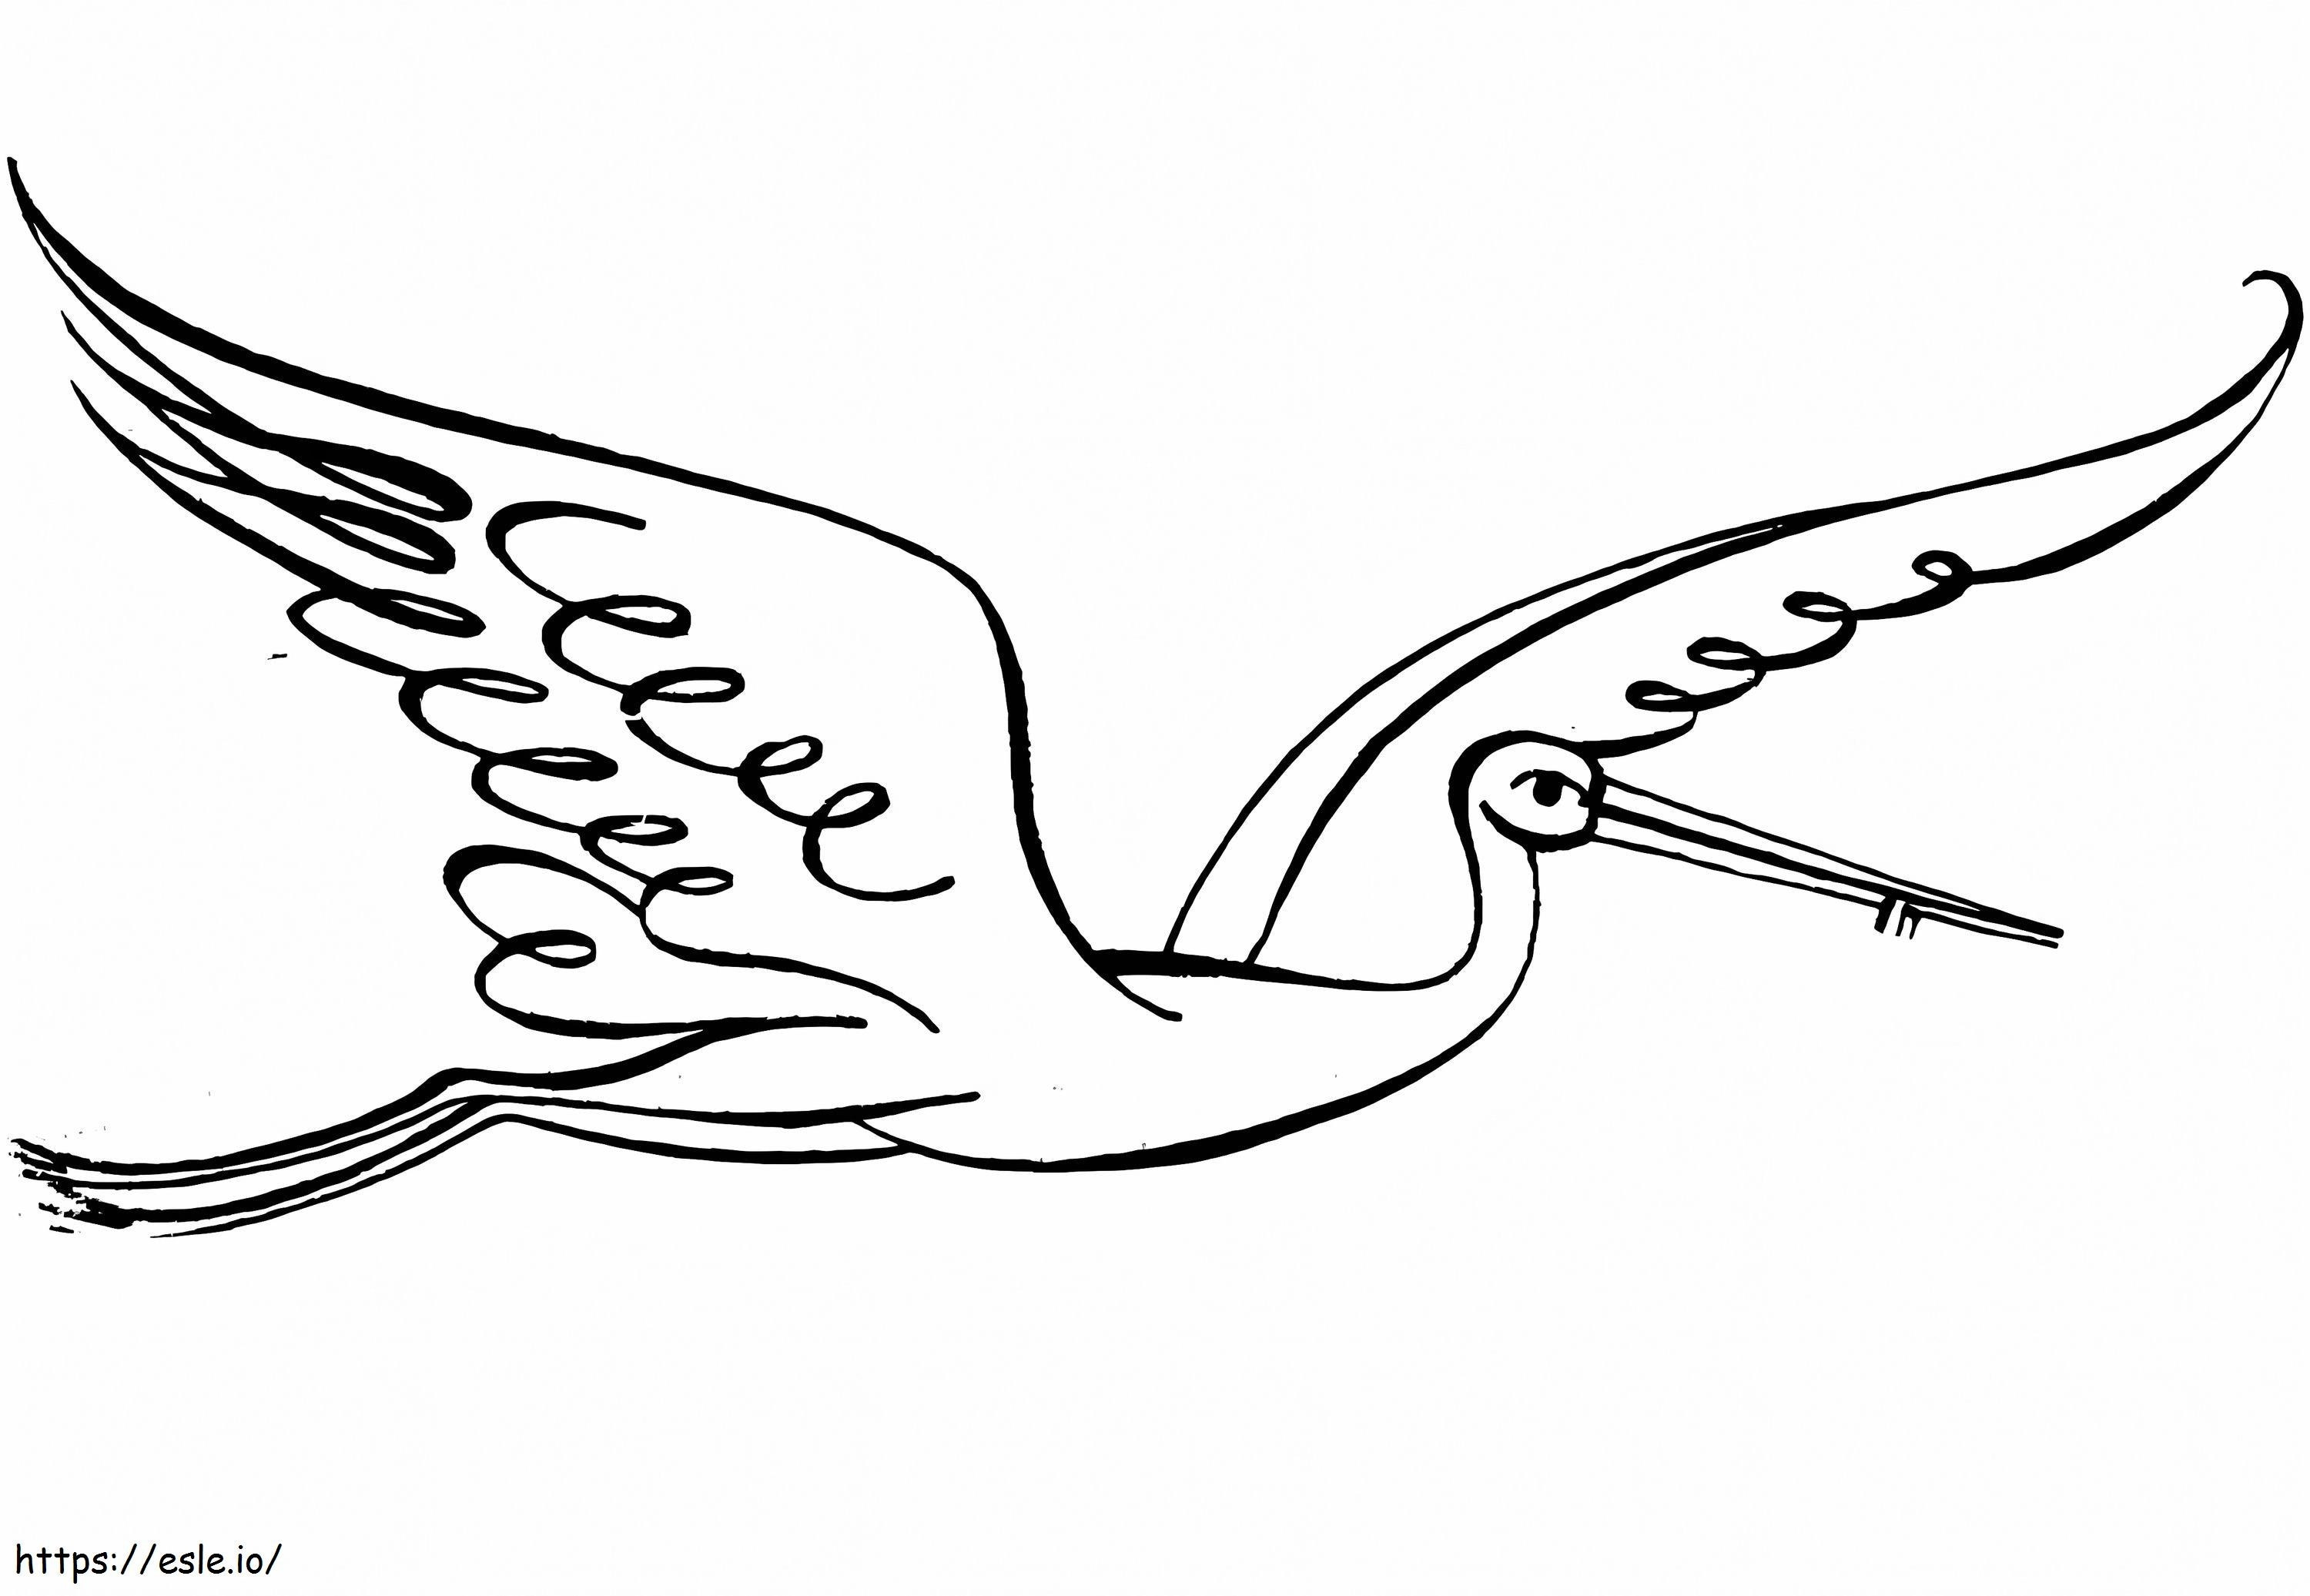 Stork Flying coloring page